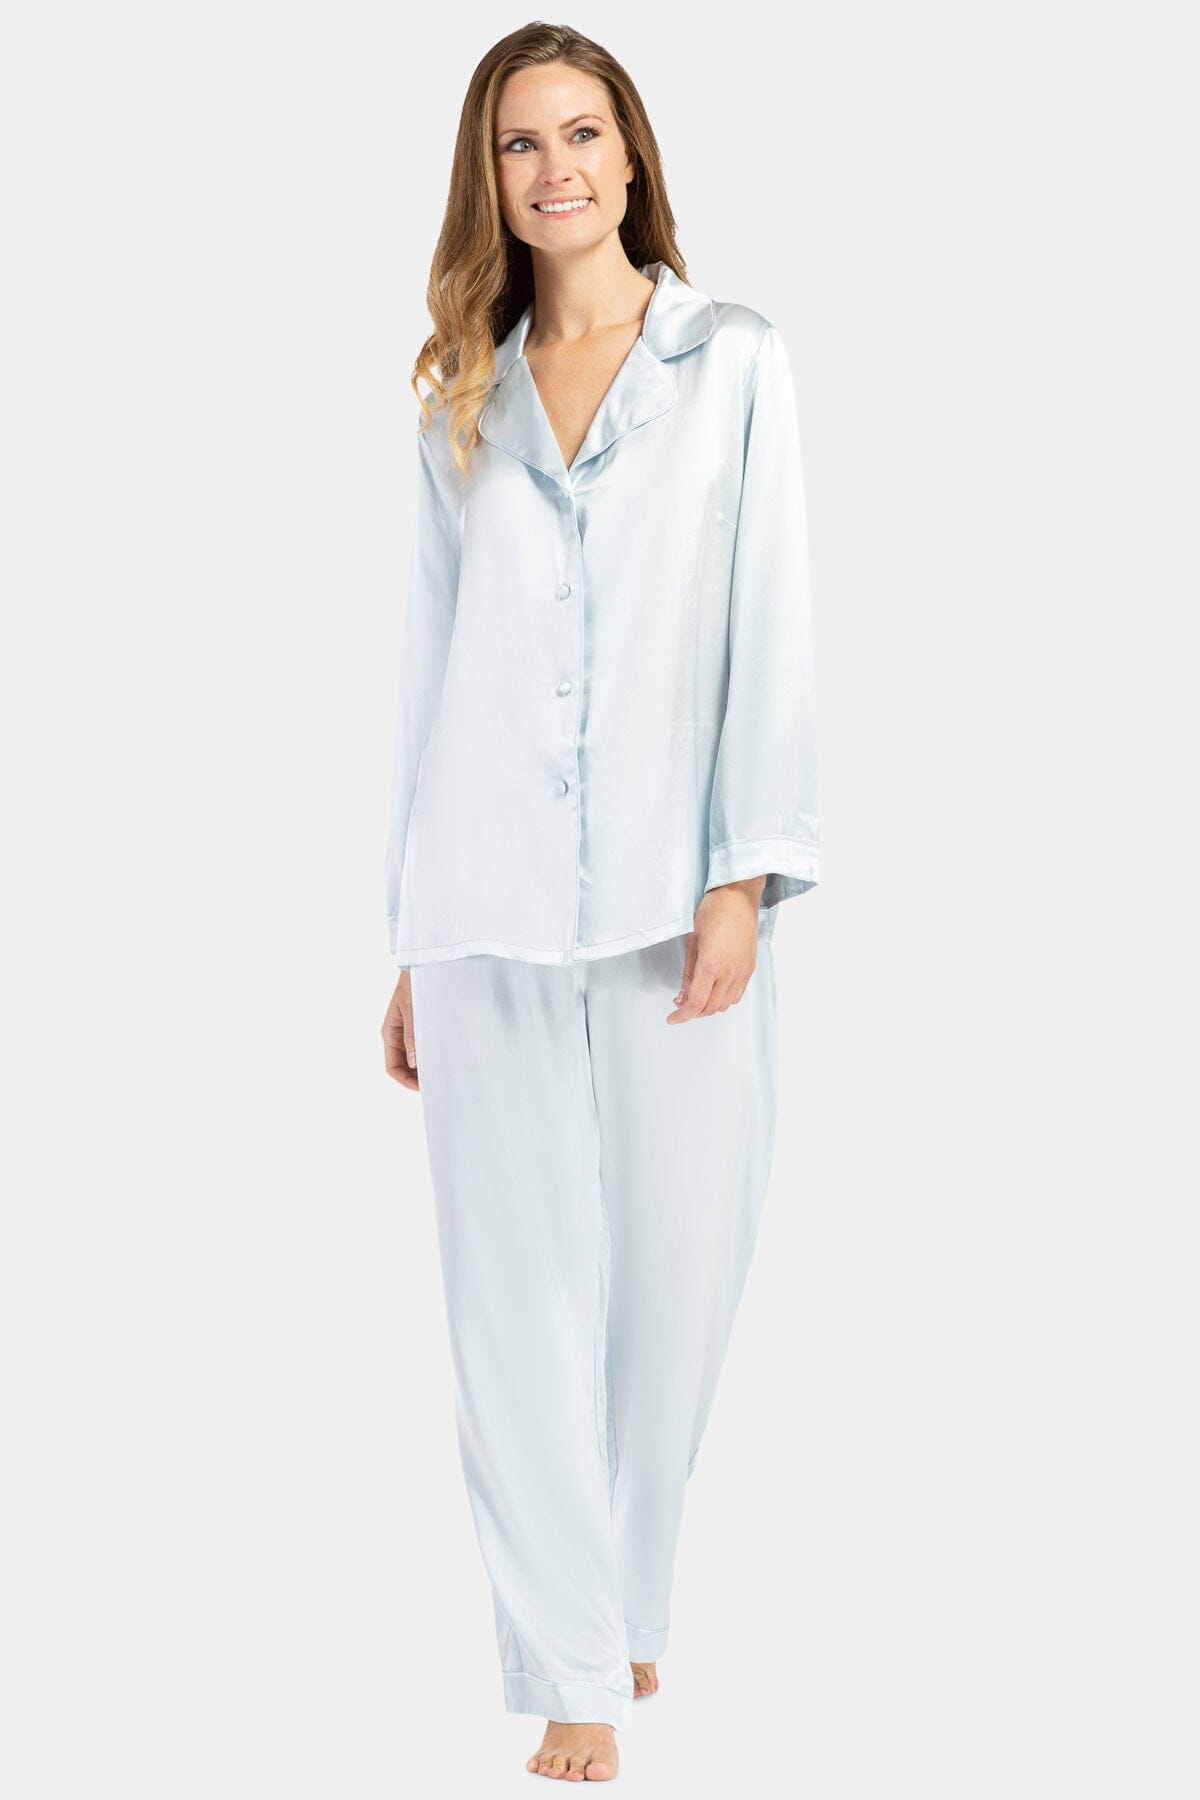 Women's 100% Mulberry Silk Classic Full Length Pajama Set with Gift Box